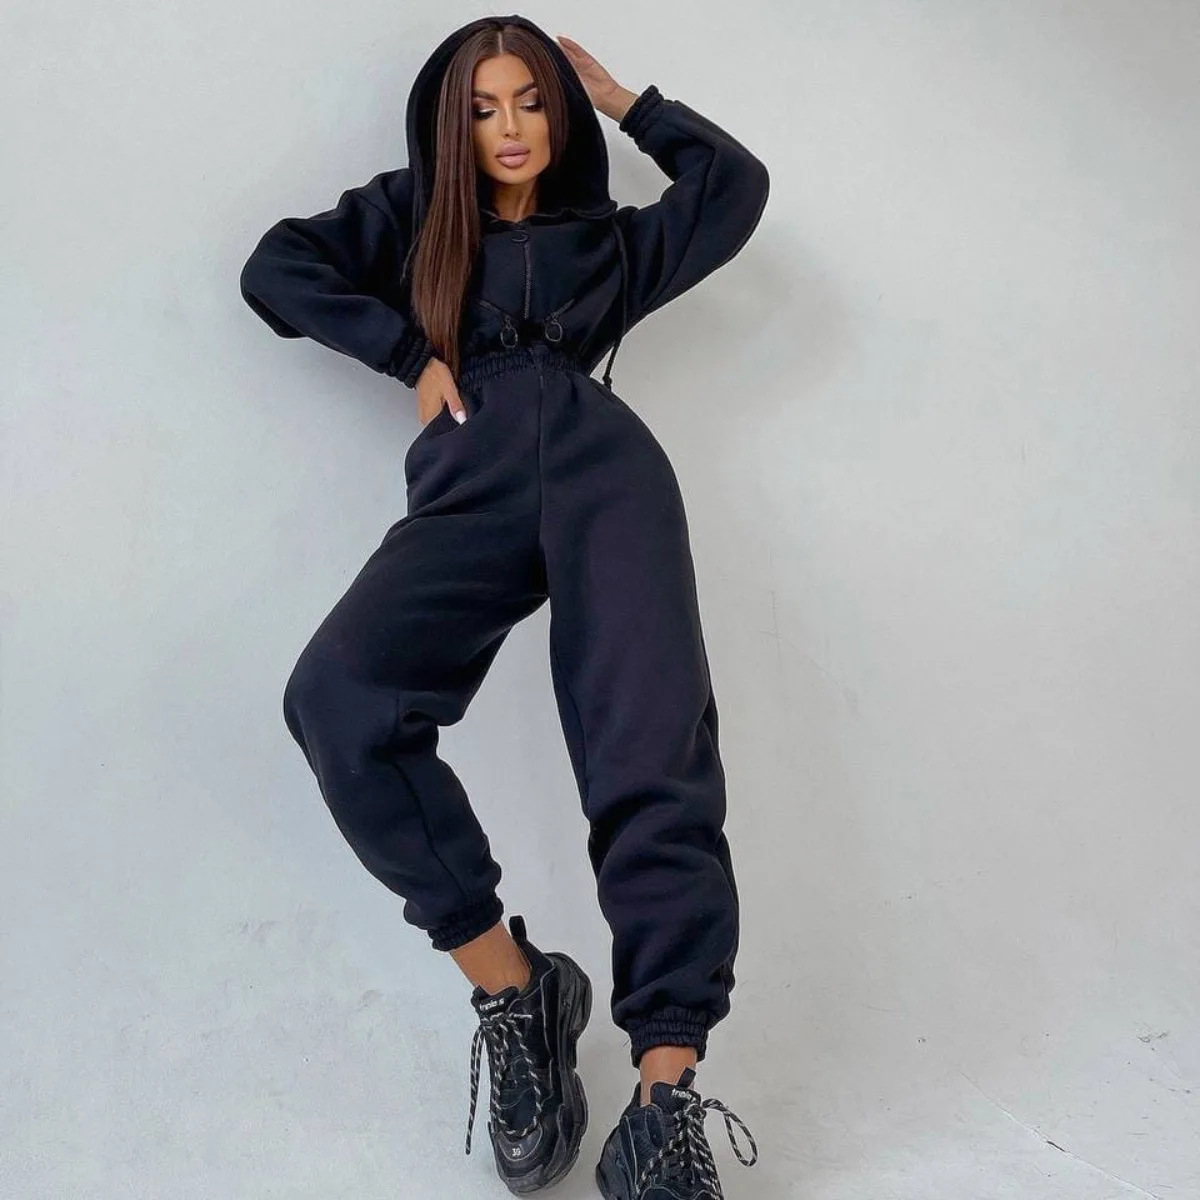 

Elegant Hoodies Jumpsuit Korea Fashion Women Long Sleeve One Piece Outfit Warm Overalls Winter Sportwear Rompers Tracksuits New